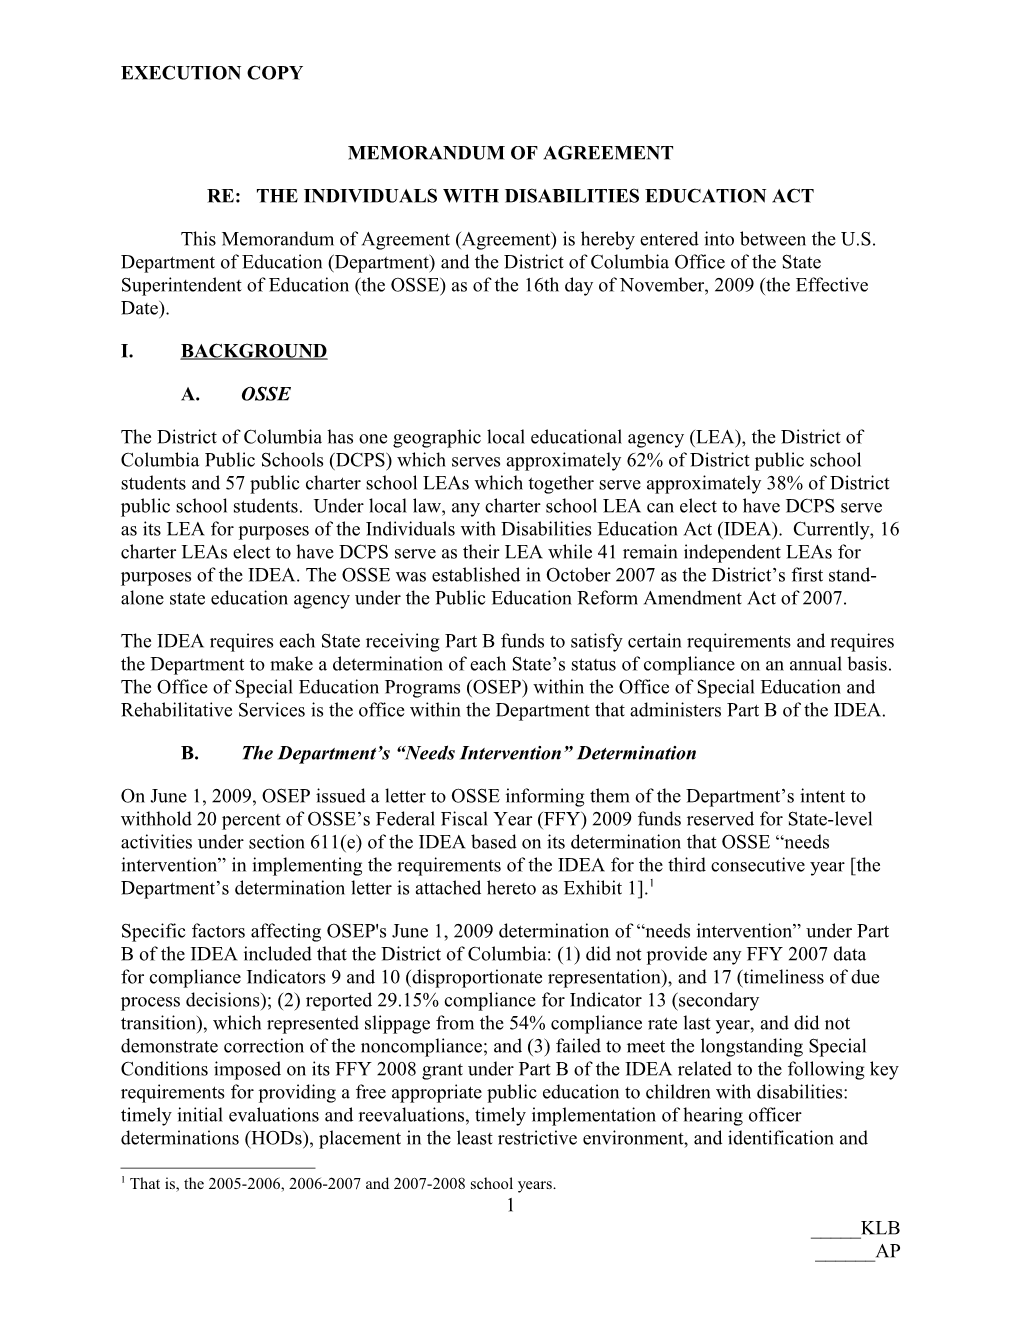 Memorandum of Agreement: U.S. Department of Education and the District of Columbia (MS Word)